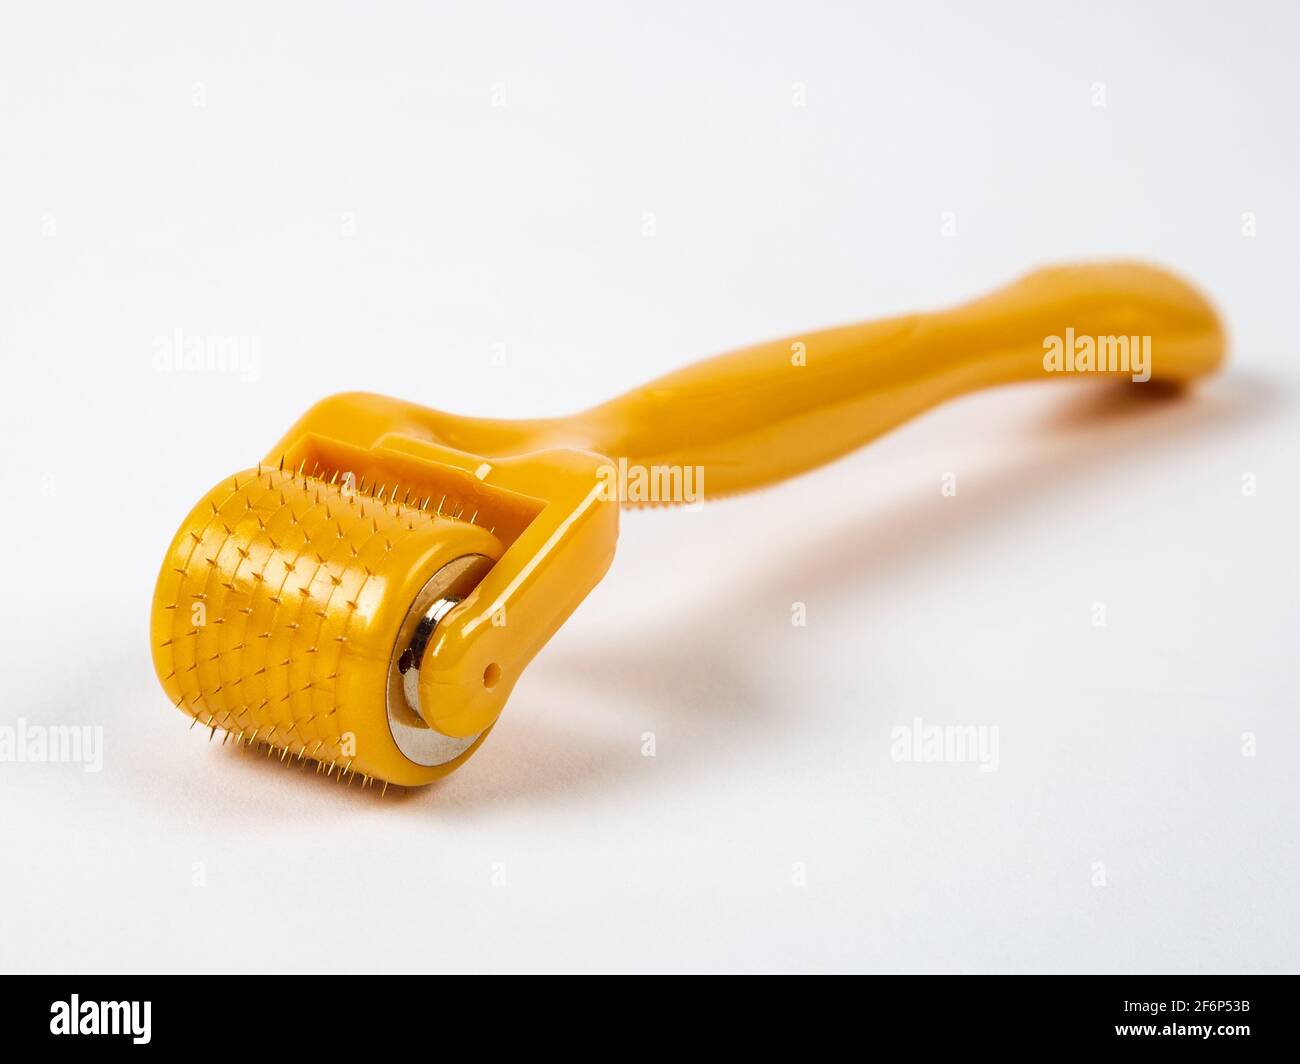 Mesoroller for the face on a white background. A tool for skin rejuvenation. Stock Photo